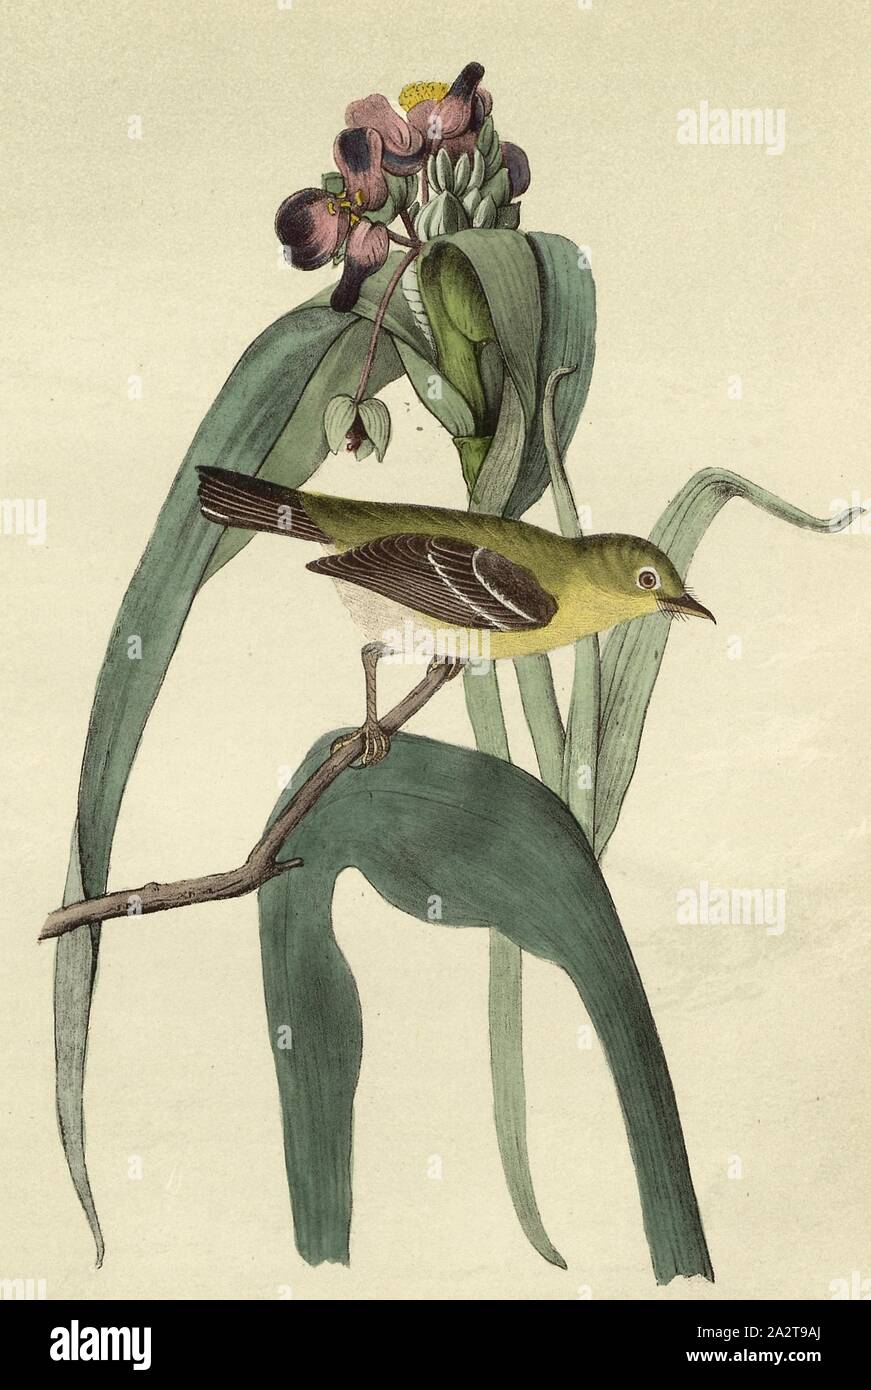 Small-headed Flycatcher - Virginian Spider-wort, Tradescantia virginica, Flycatcher (Muscicapa minuta), three-master flower or God's eye, Signed: J.J. Audubon, J.T. Bowen, lithograph, Pl. 67 (vol. 1), Audubon, John James (drawn); Bowen, J. T. (lith.), 1856, John James Audubon: The birds of America: from drawings made in the United States and their territories. New York: Audubon, 1856 Stock Photo